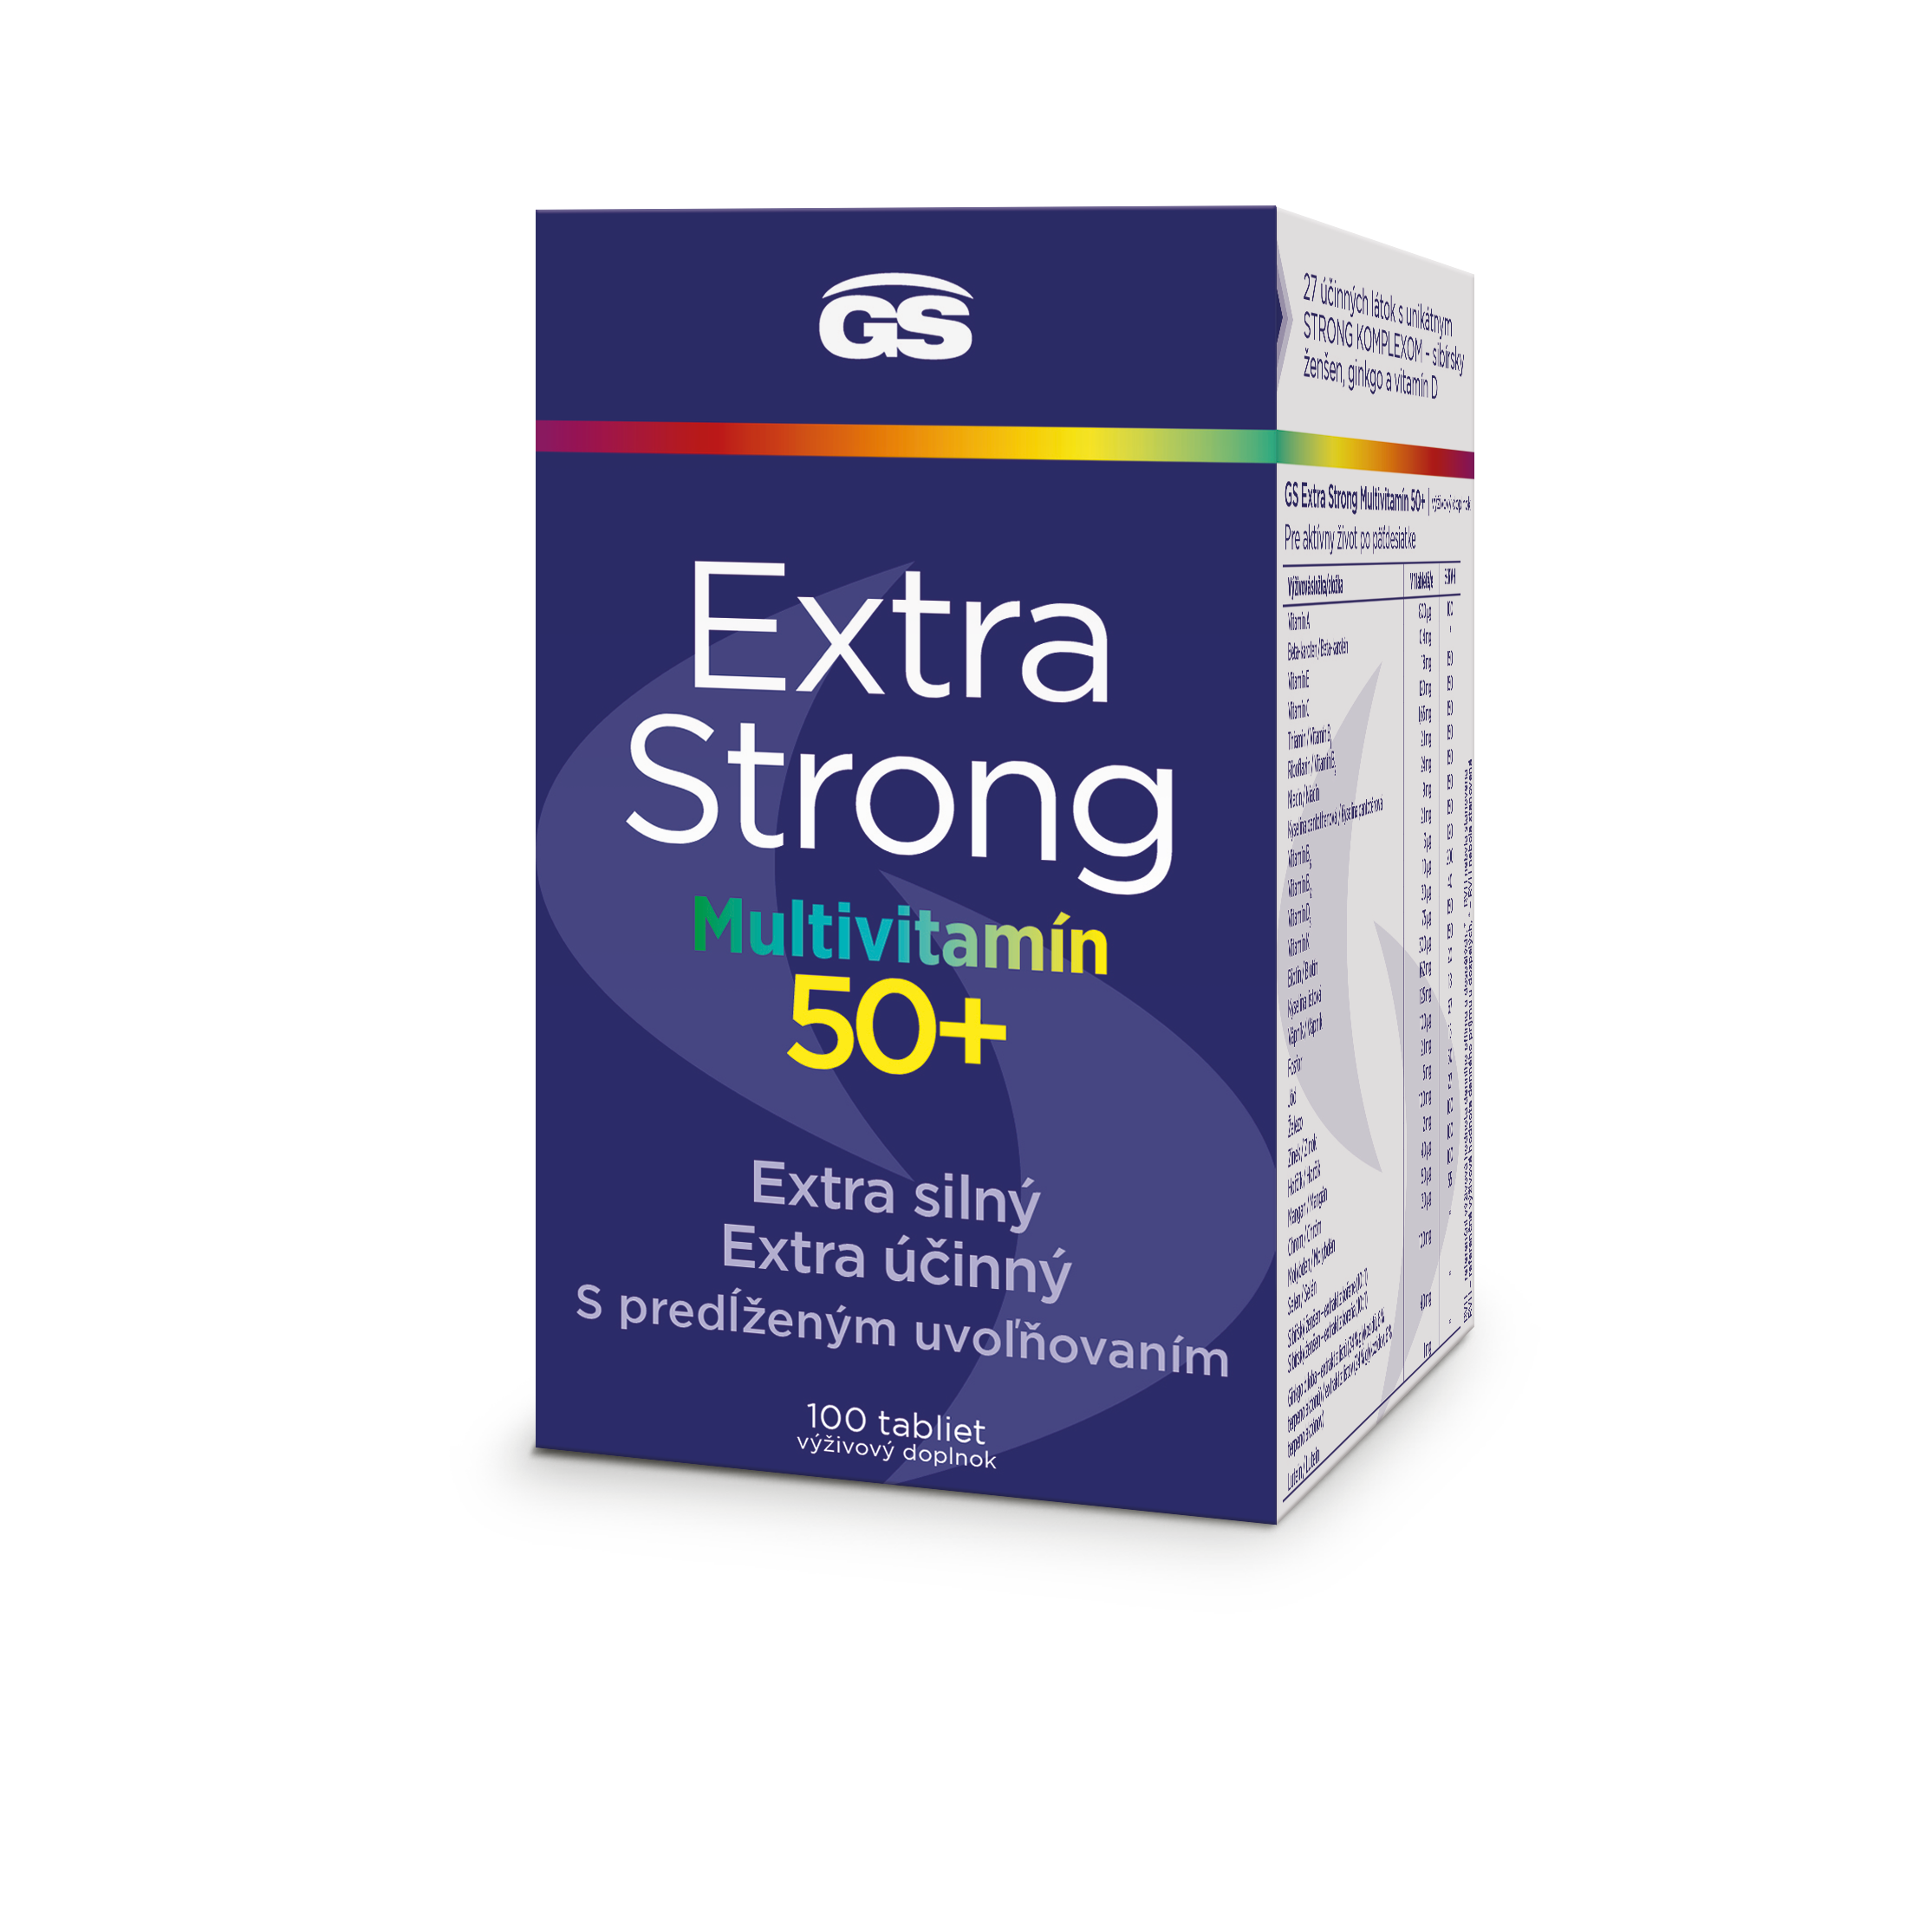 GS Extra Strong Multivitamin 50, 100 tbl